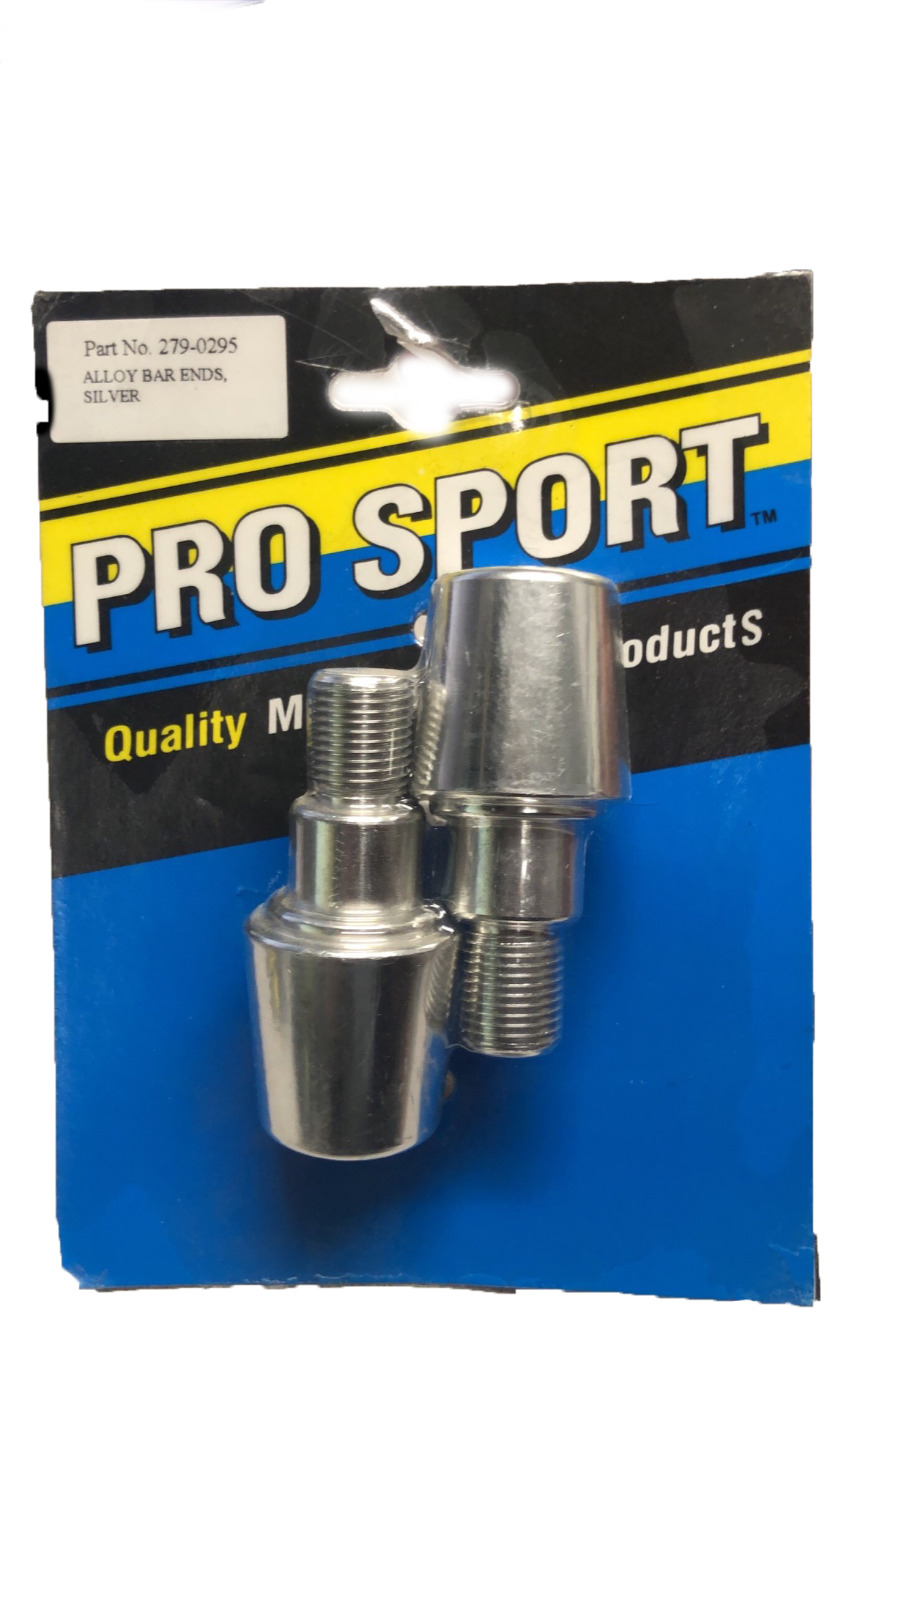 Pro Sport Silver Alloy Bar Ends for Sportbikes 279-0295